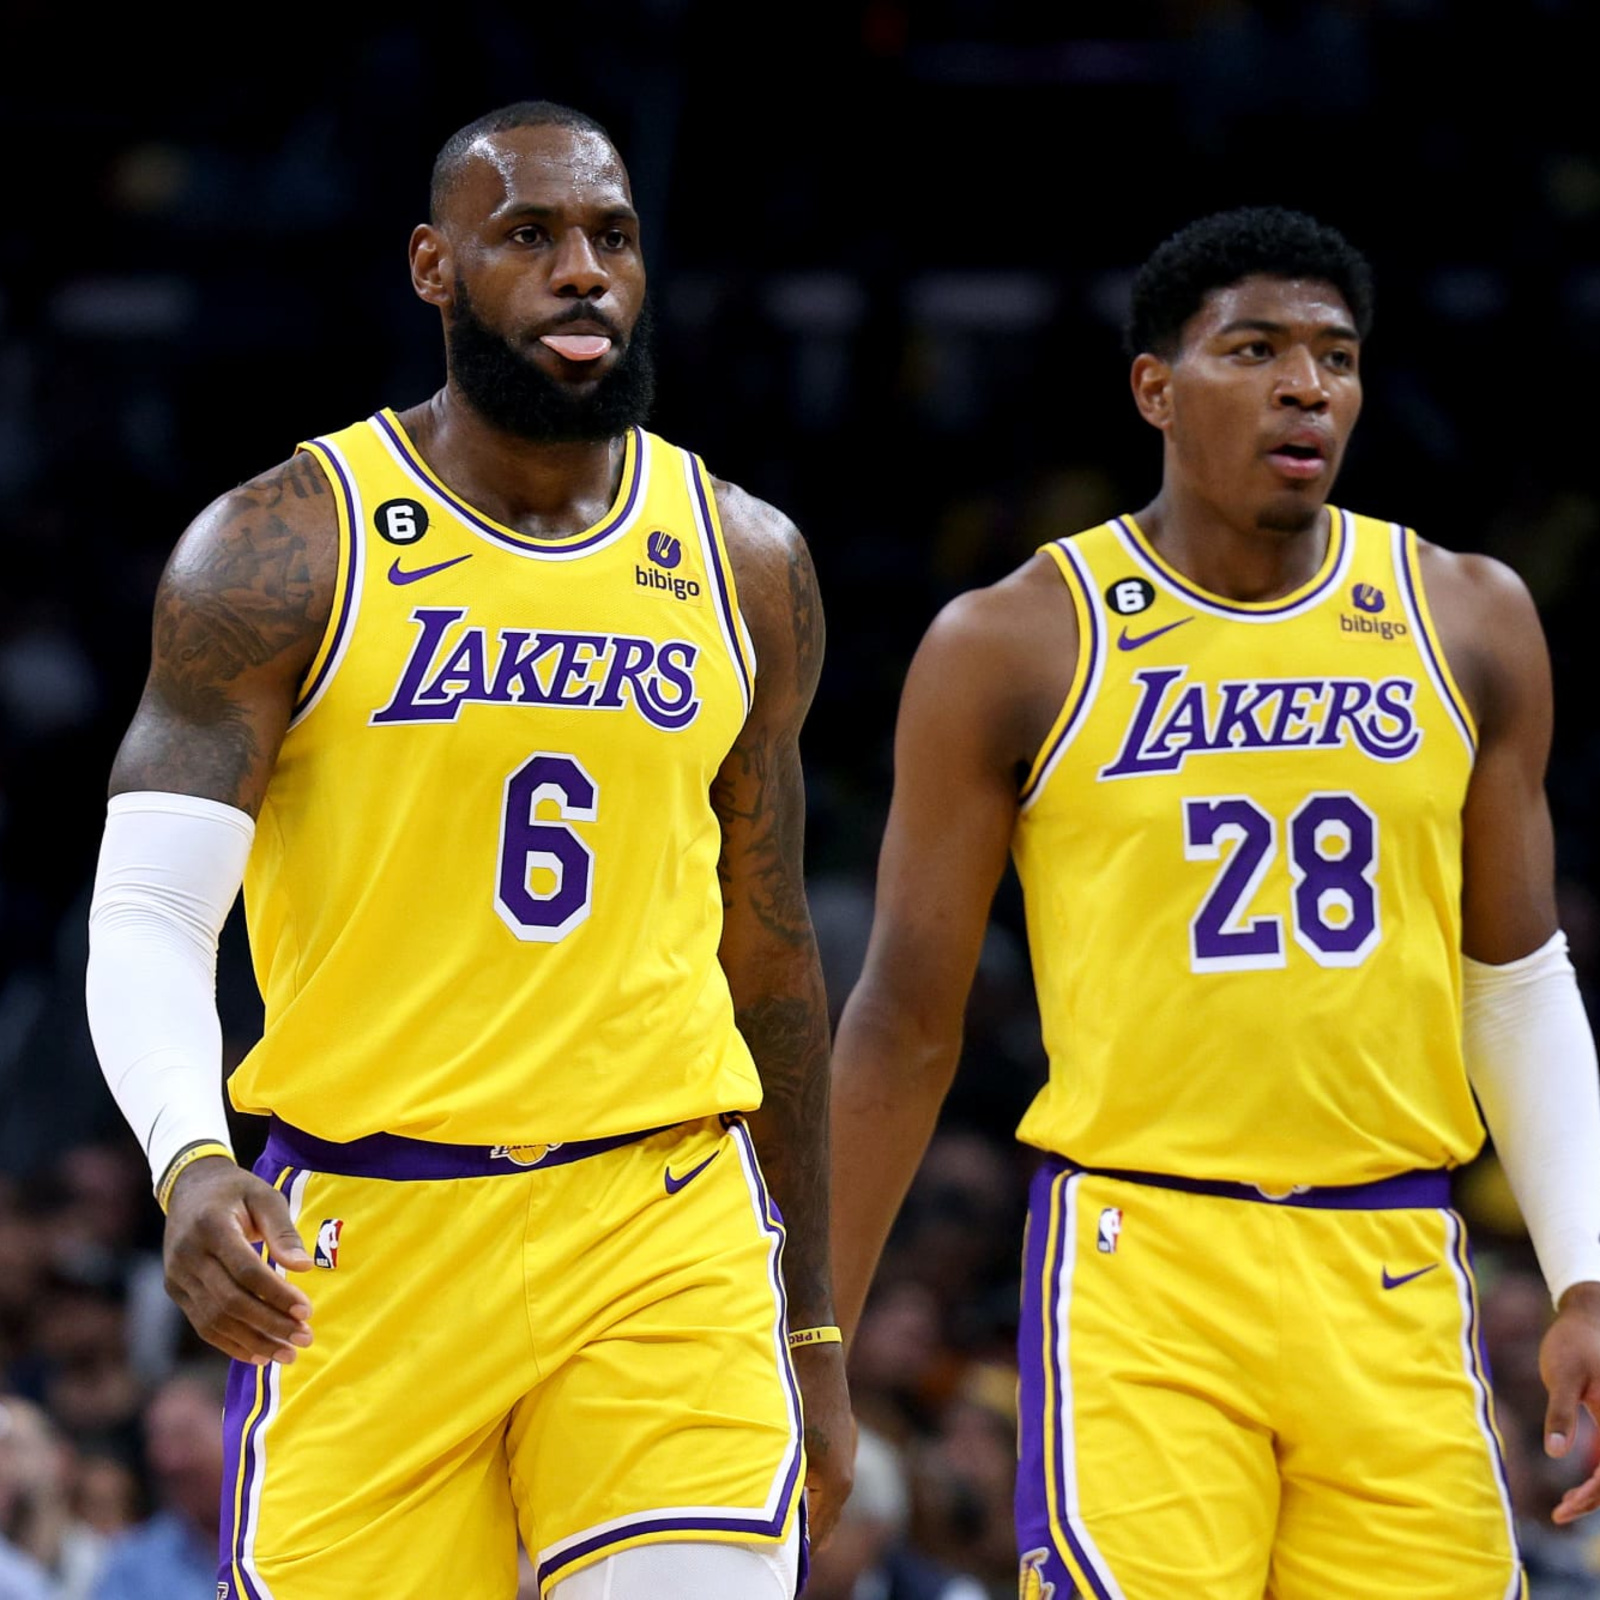 It's really hard to keep my mind: When Rui Hachimura spoke about